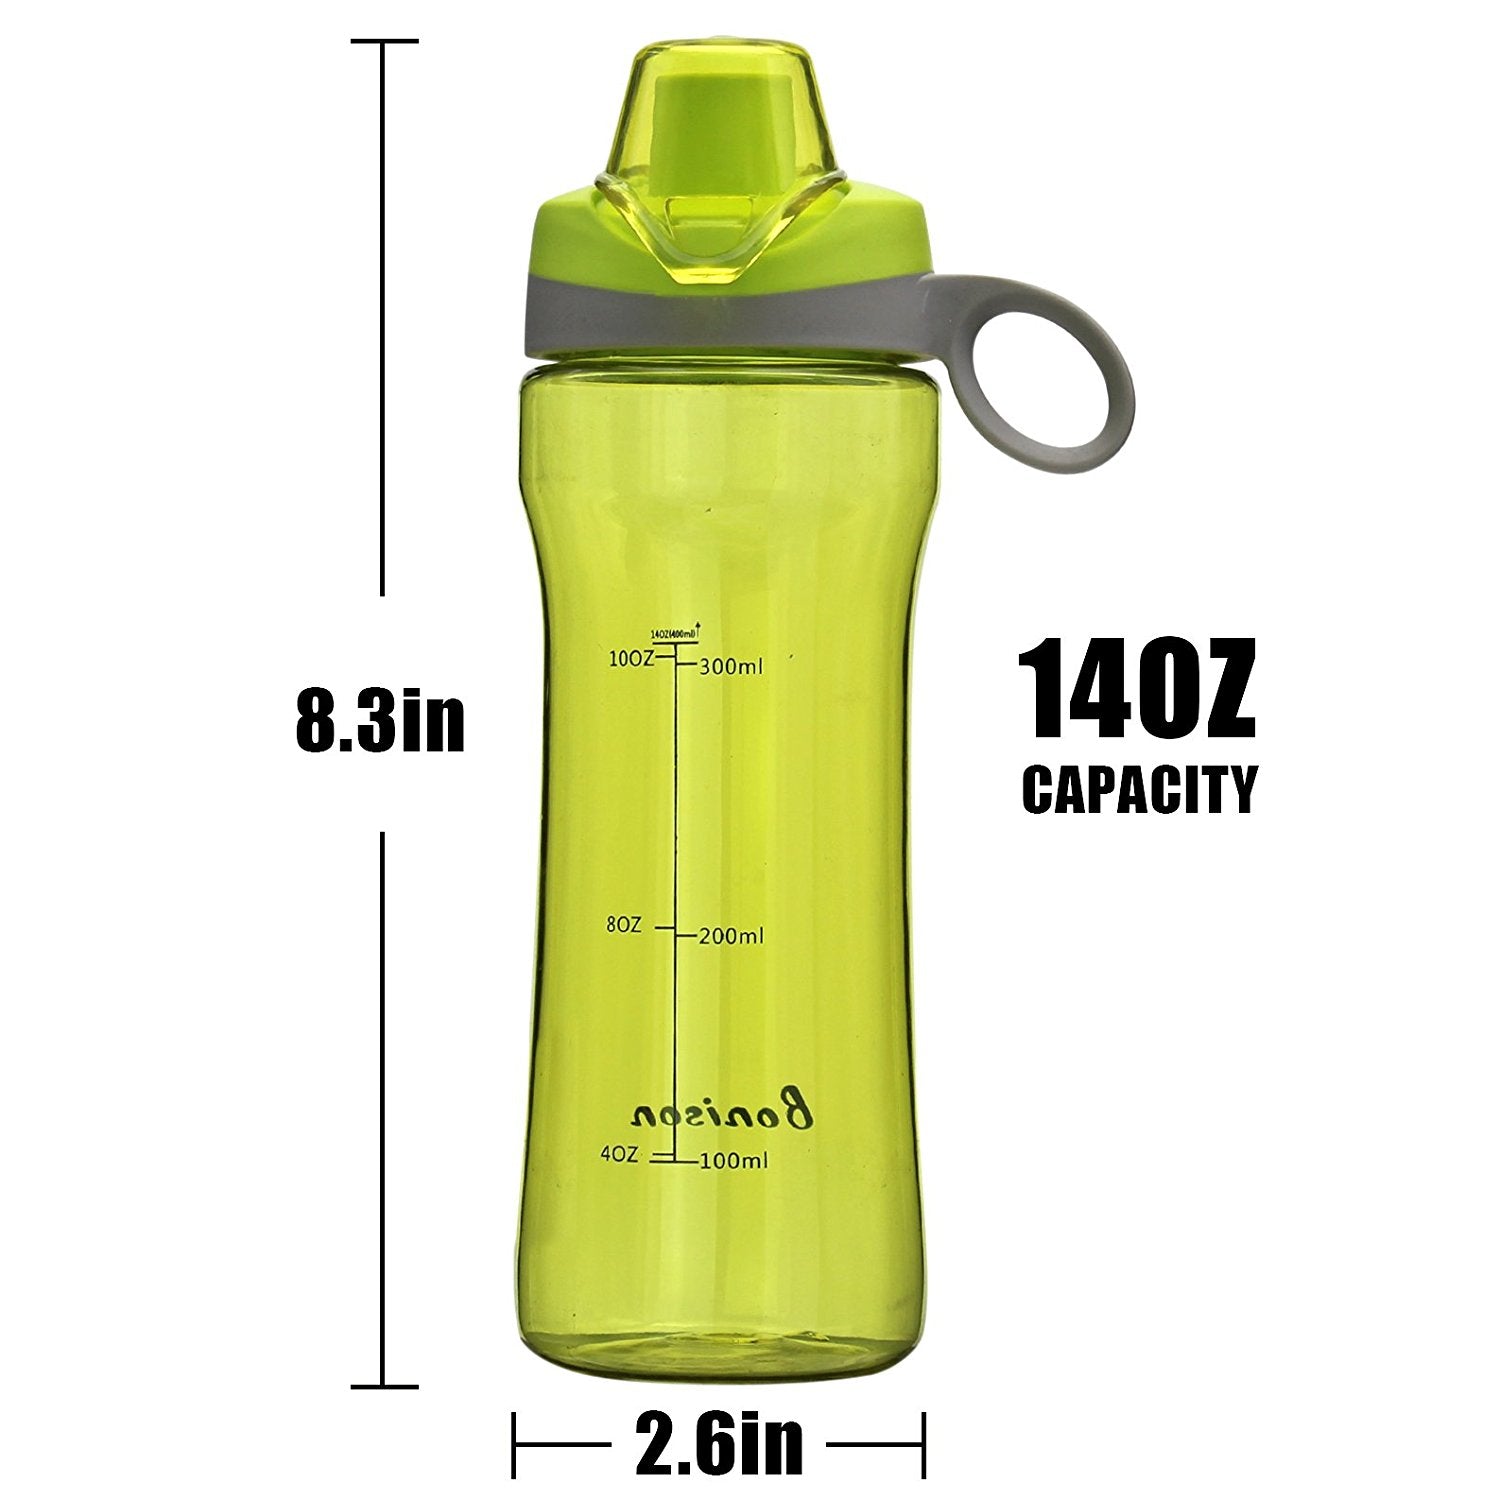 BONISON 14 OZ Kids Water Bottle With Flip Top Lid Leak Proof Bpa Free Drinking Water Bottle For School Running Outdoor Cycling And Camping Perfect Size For Kids - Green